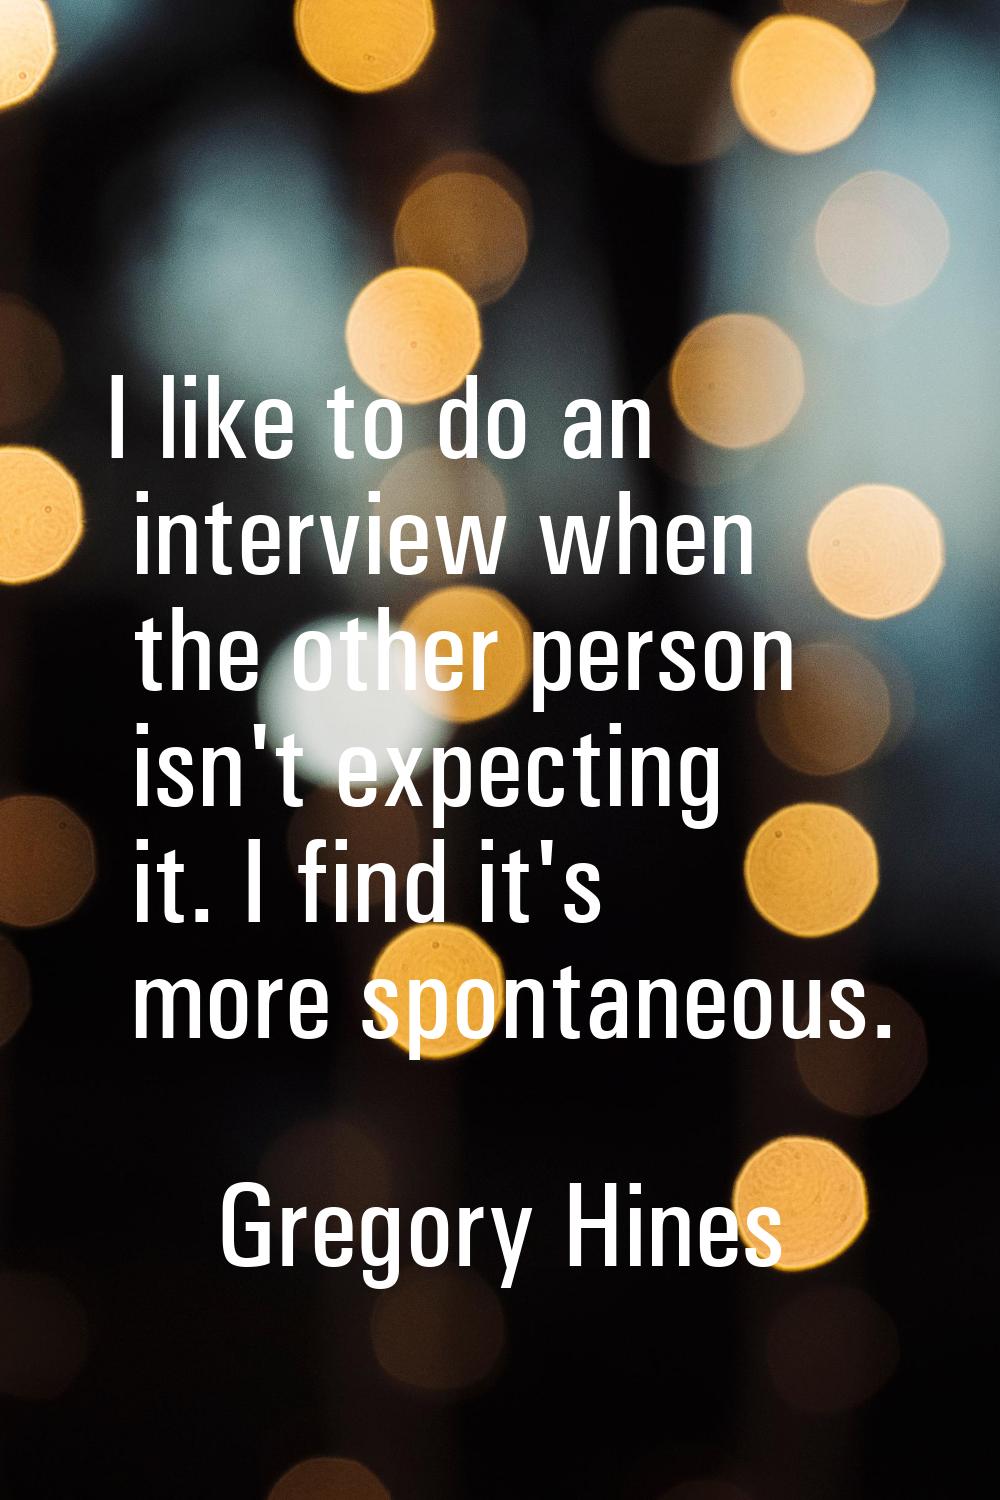 I like to do an interview when the other person isn't expecting it. I find it's more spontaneous.